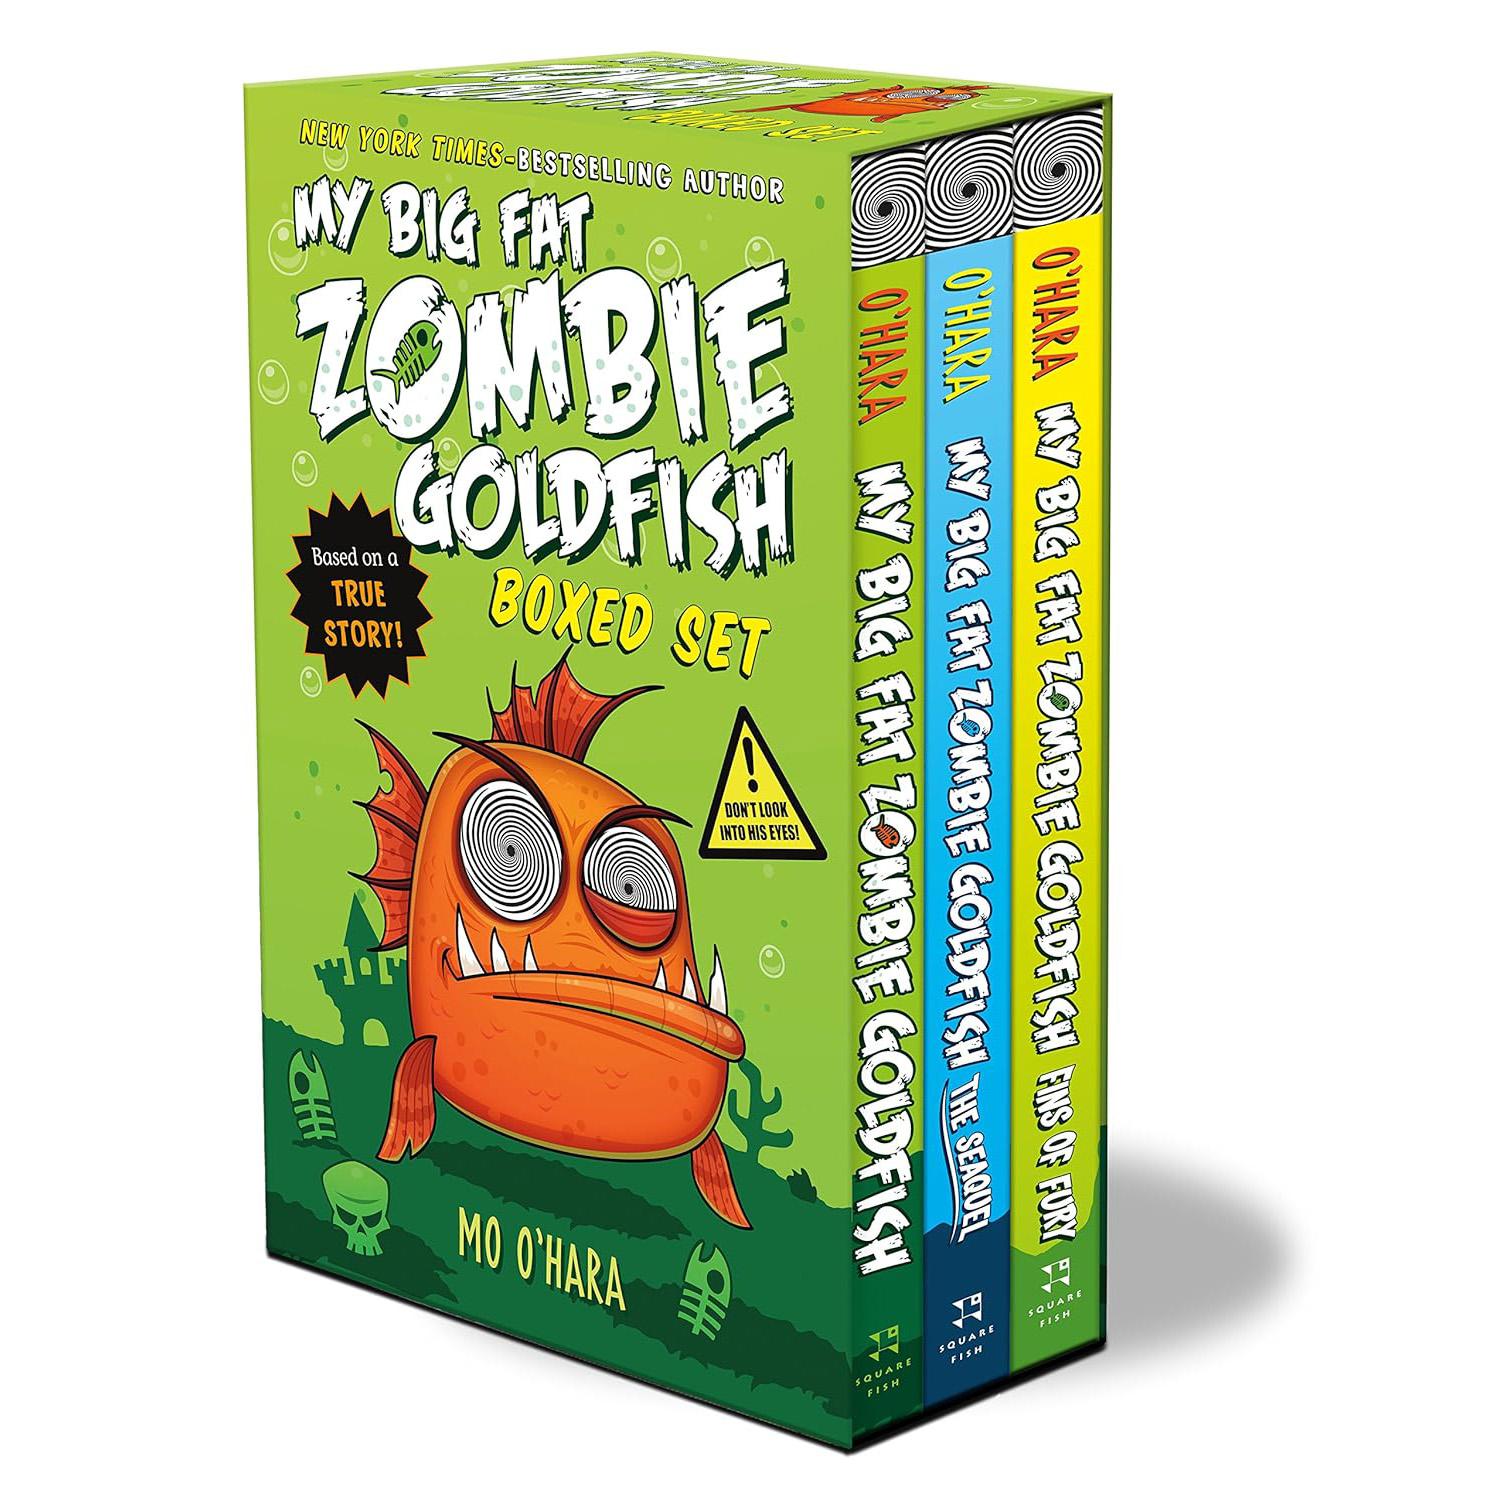 My Big Fat Zombie Goldfish Boxed Set Paperback Book Set for $8.79